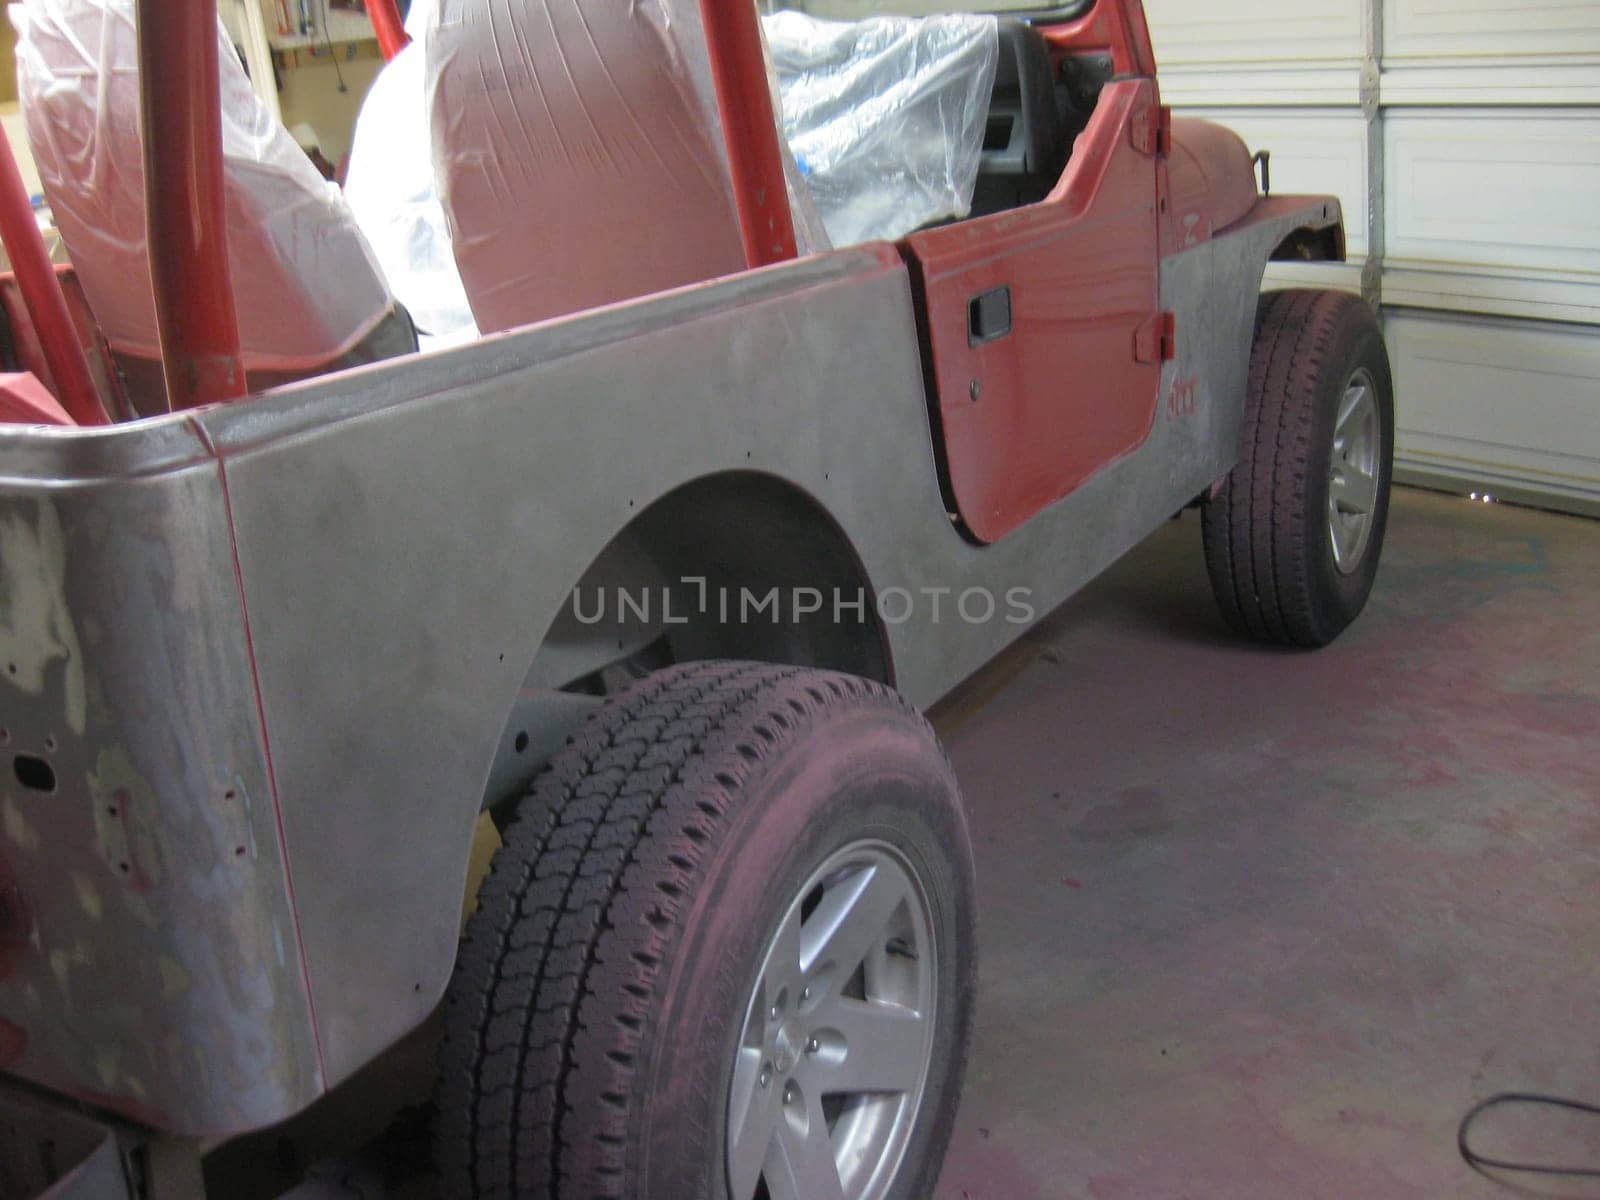 Auto Body Repair and Repainting Prep Work on Red Vehicle. High quality photo